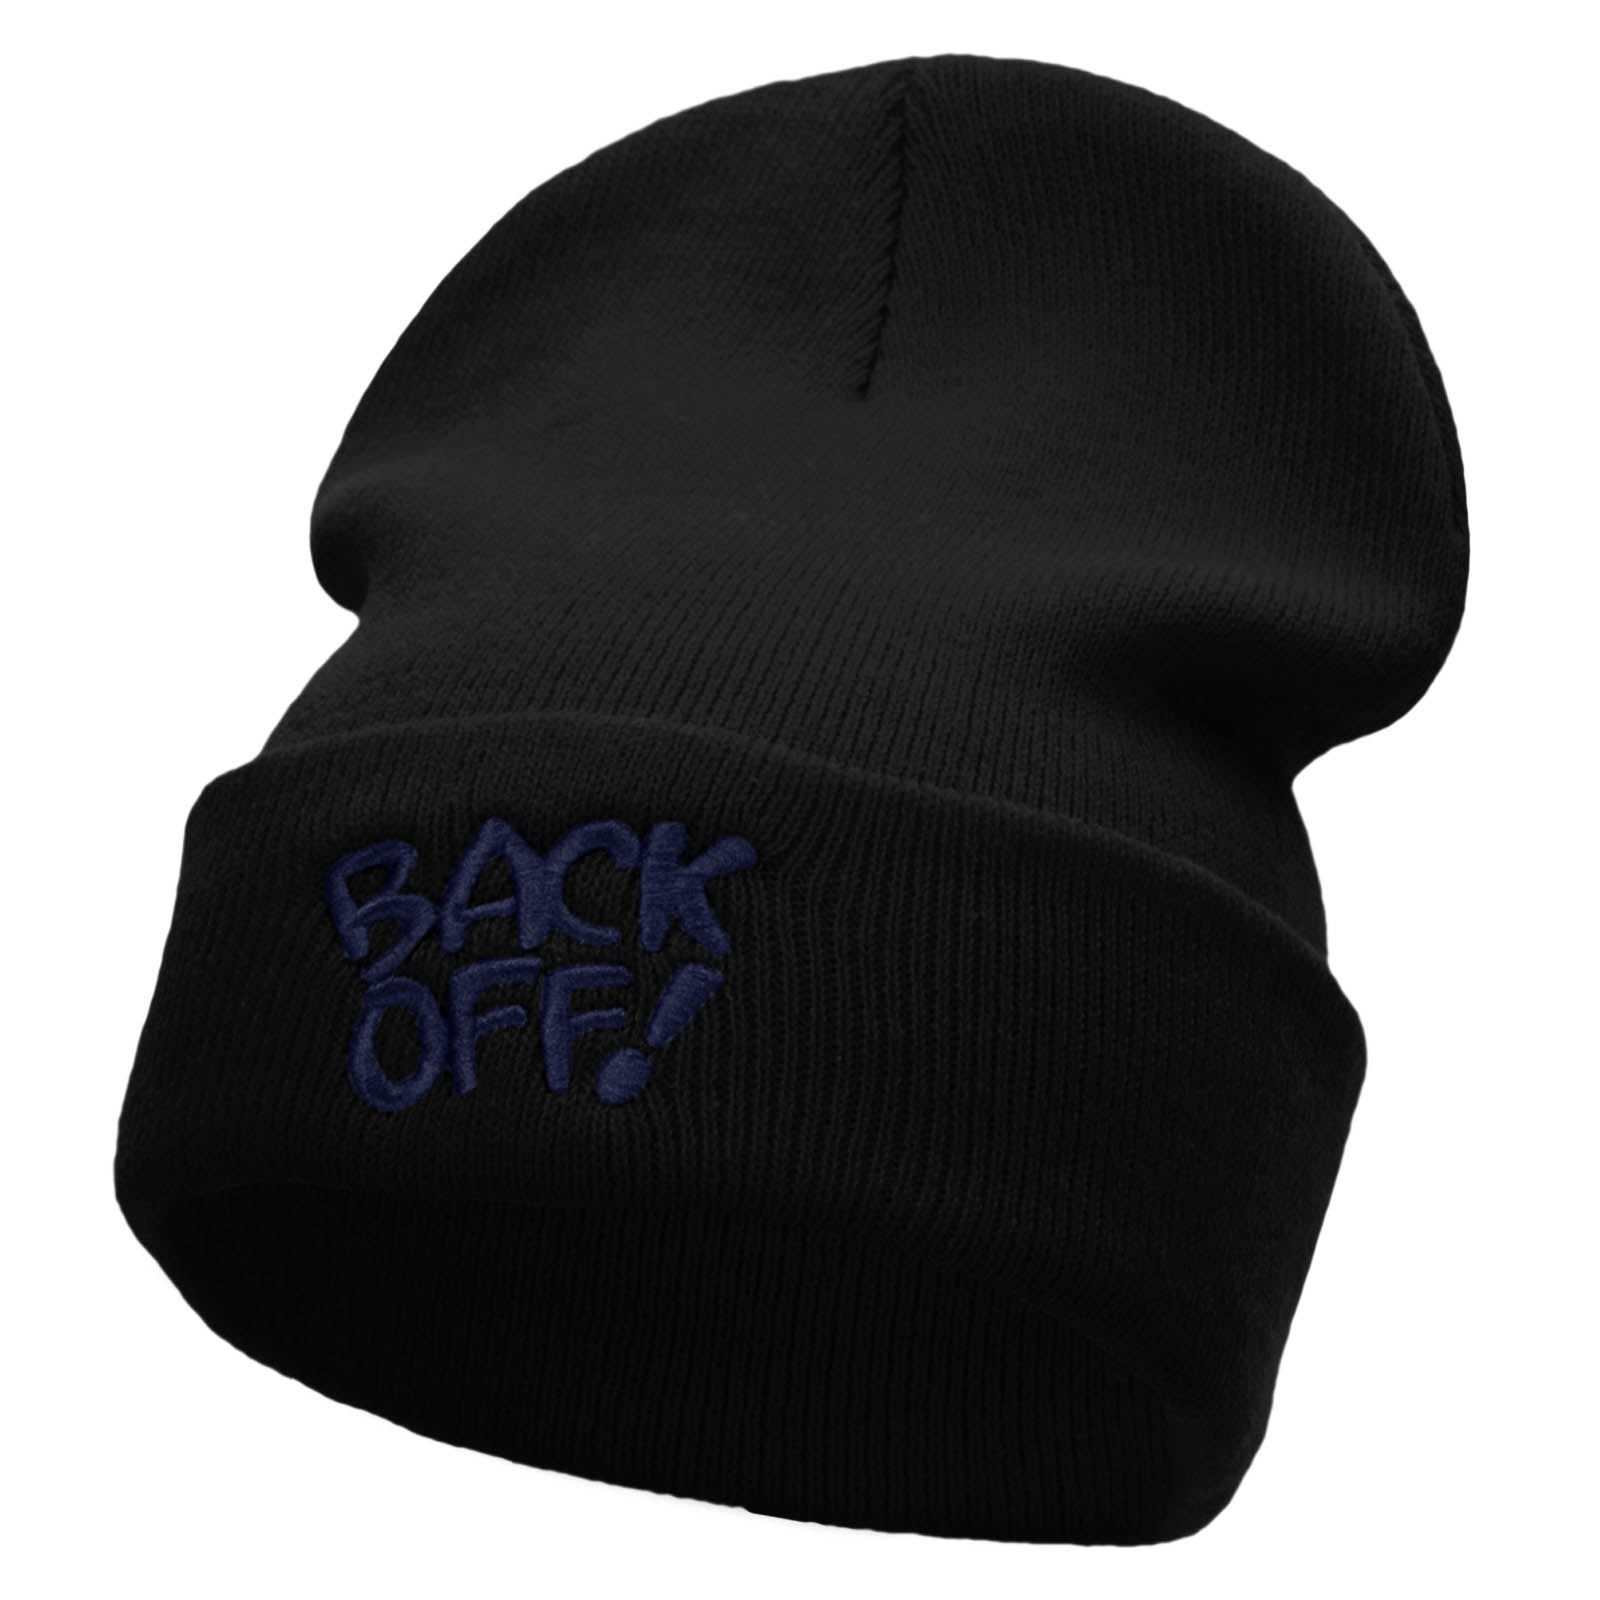 Back Off Phrase Embroidered 12 Inch Long Knitted Beanie - Black OSFM